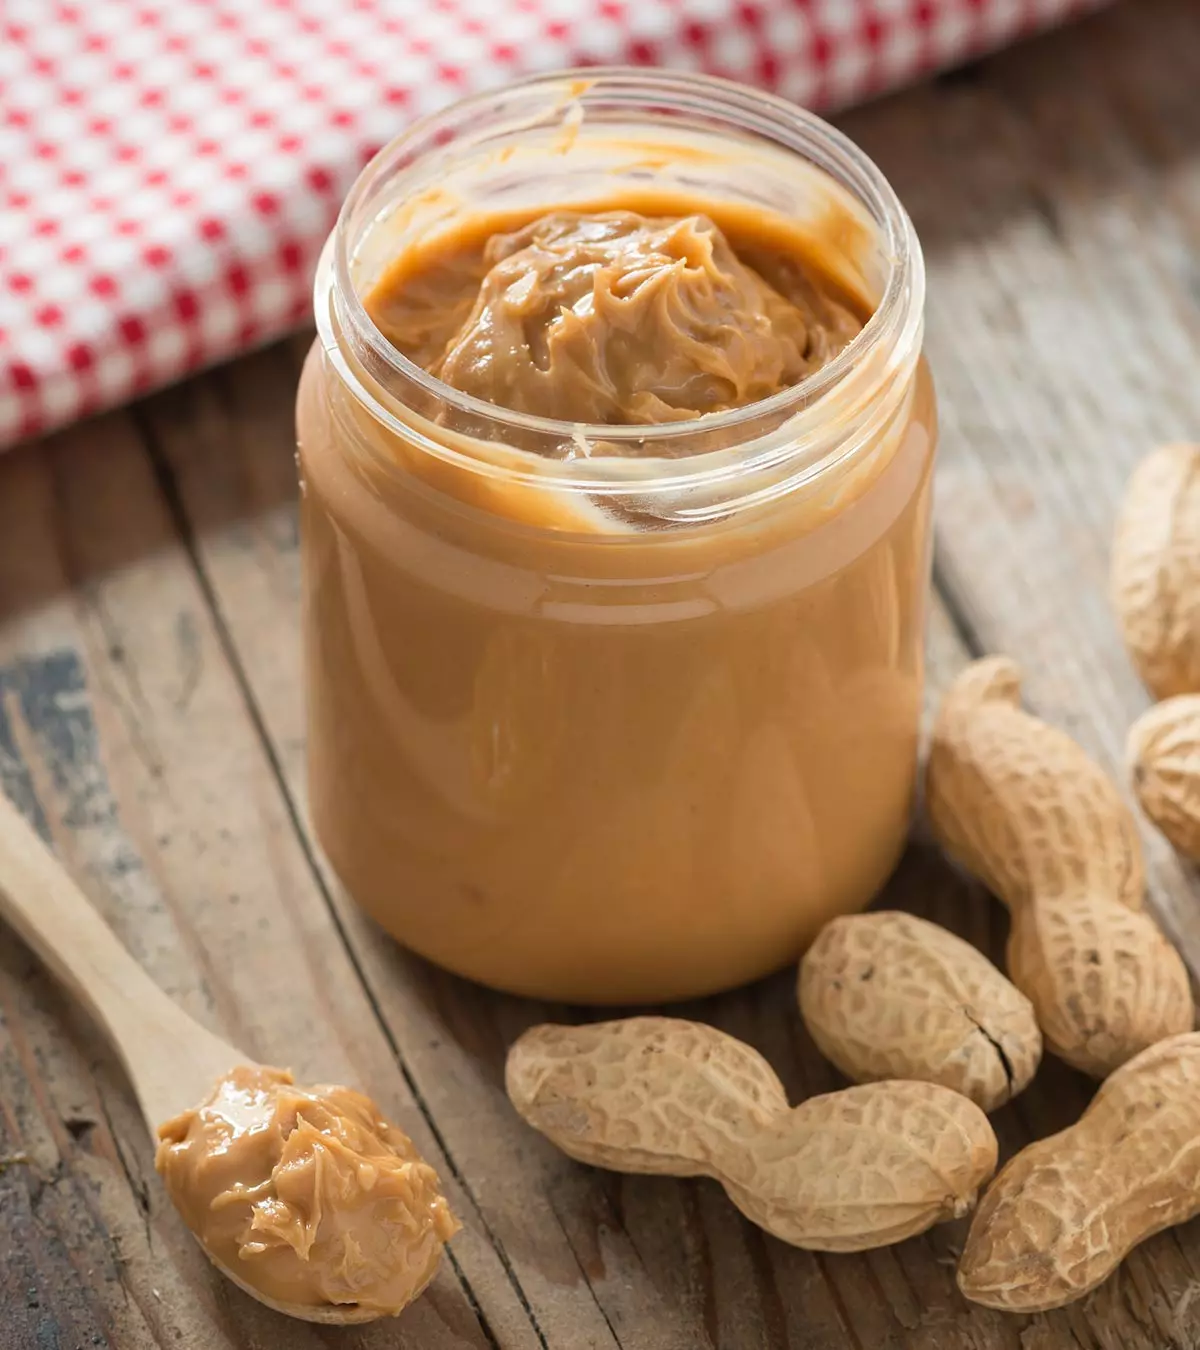 The superfood peanut benefits not only you but also the little one growing inside you.